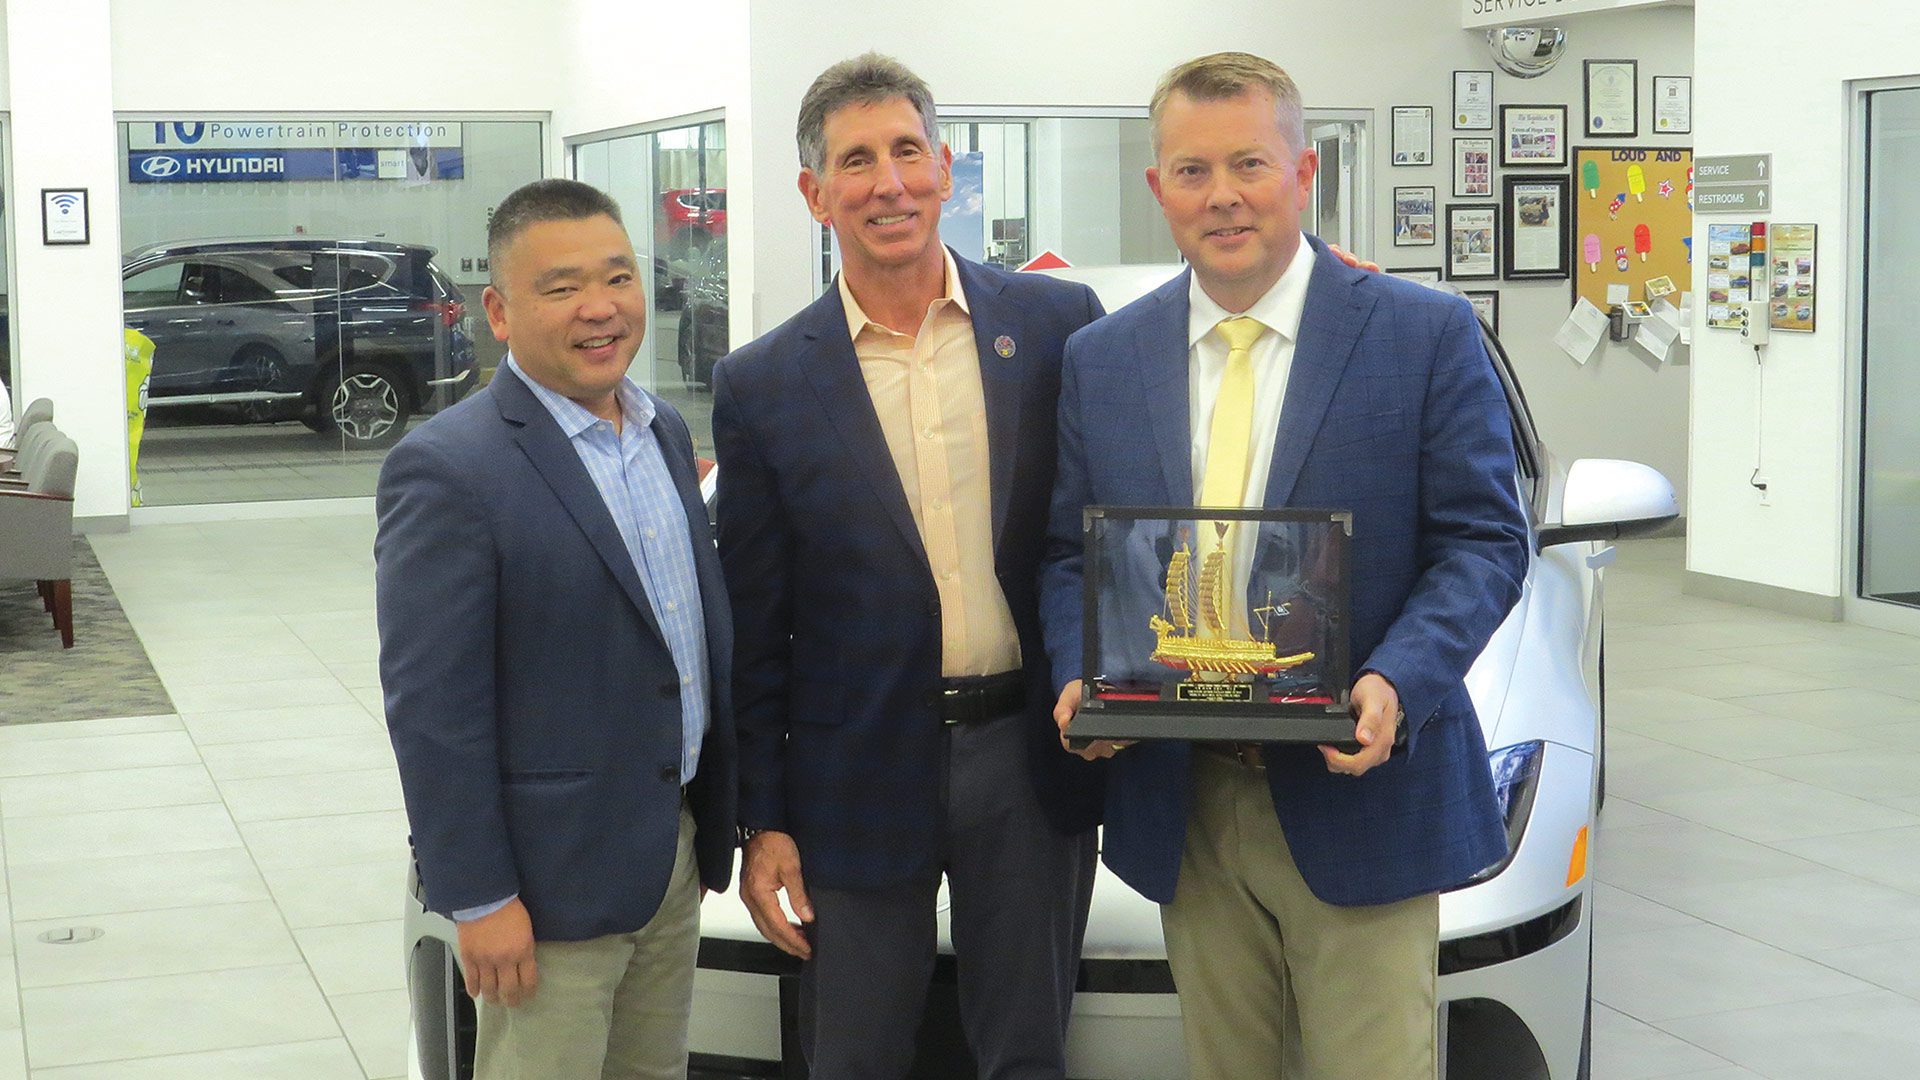 from left, Bob Kim, Hyundai’s vice president of National Sales, presents the Global Dealer Award to Gary Rome, president and CEO of Gary Rome Auto Group, and Kevin Schechterle, general manager of Gary Rome Hyundai